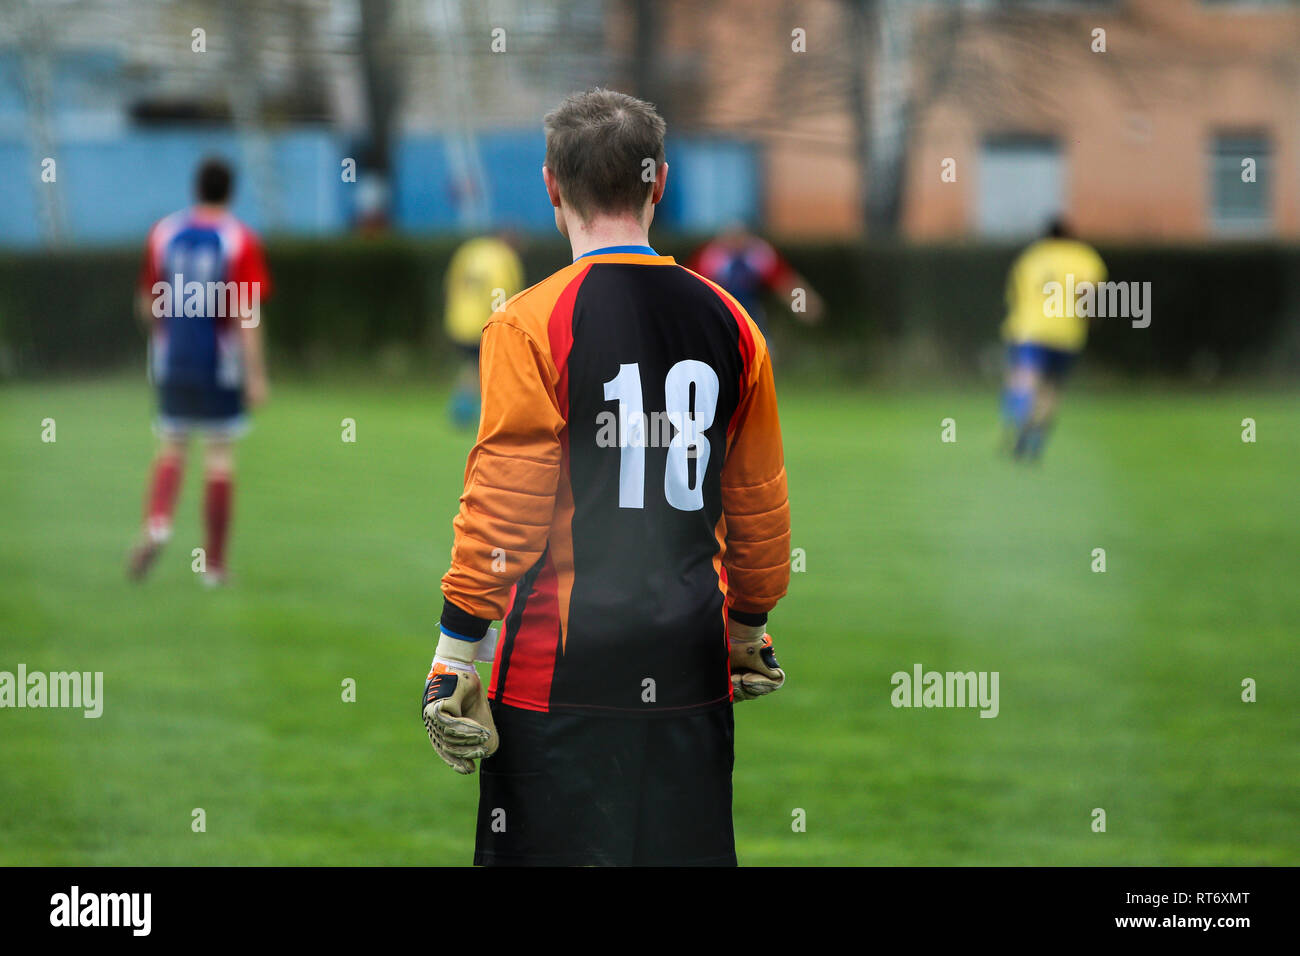 A goalkeeper is standing and looking on his team mates playing the footbal match. Stock Photo